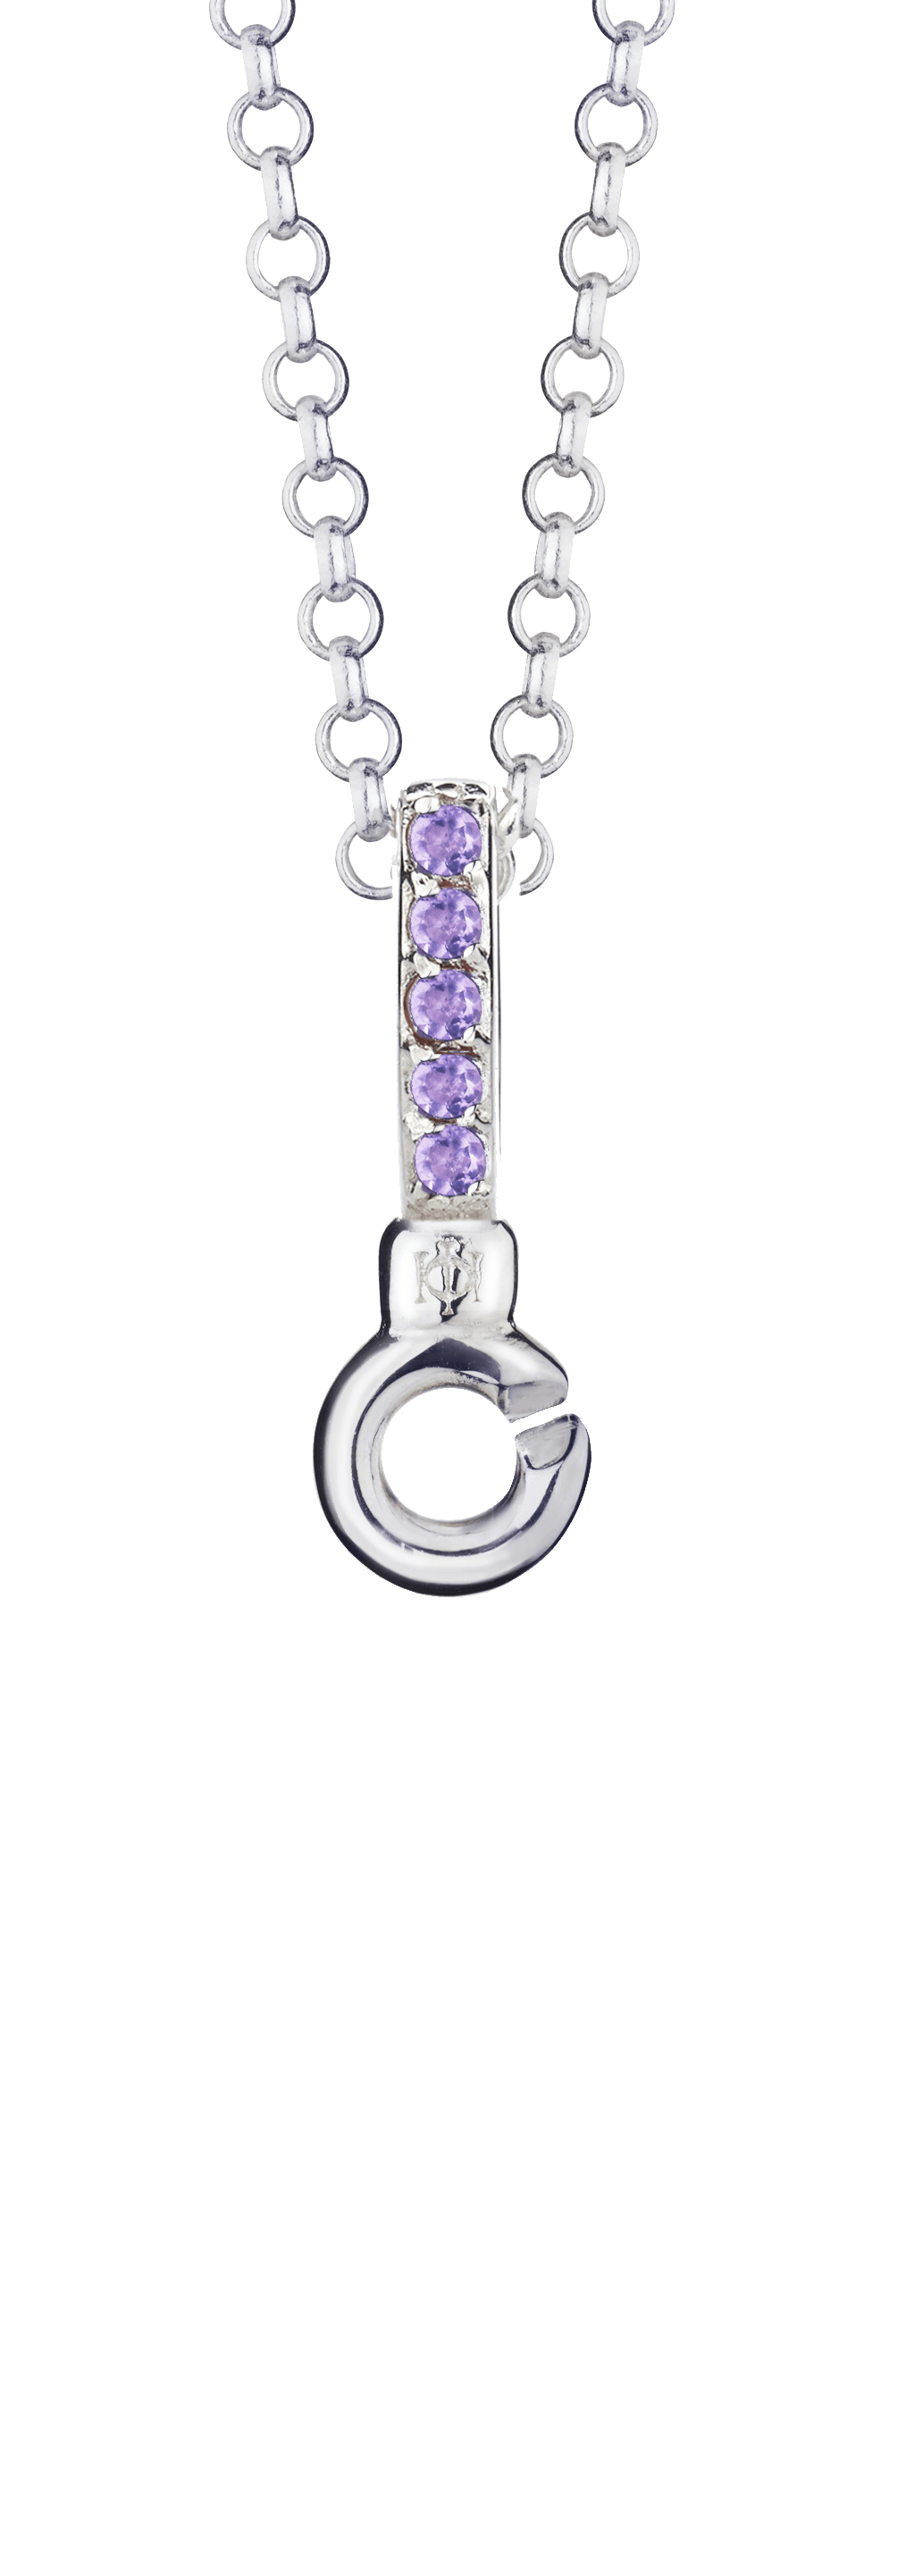 necklace clipart amethyst